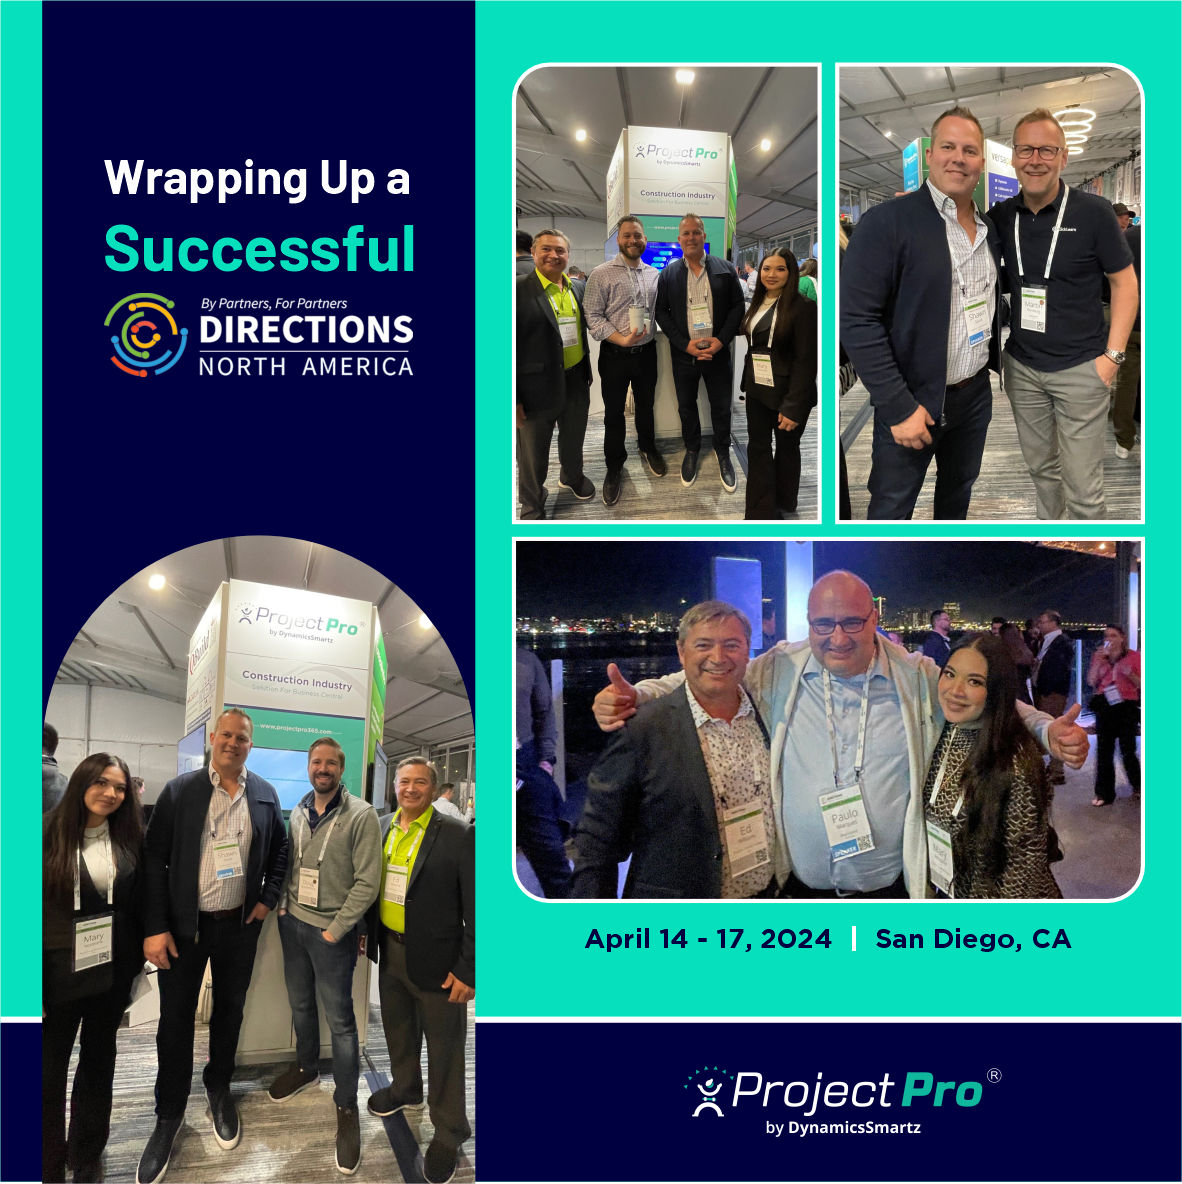 ProjectPro wants to thank the Directions North America board for hosting such a great event in San Diego! It was great to see our ProjectPro Resellers who are growing their Microsoft practice in the #construction industry.

#MicrosoftDynamics365 #MicrosoftDynamics #MSPartner